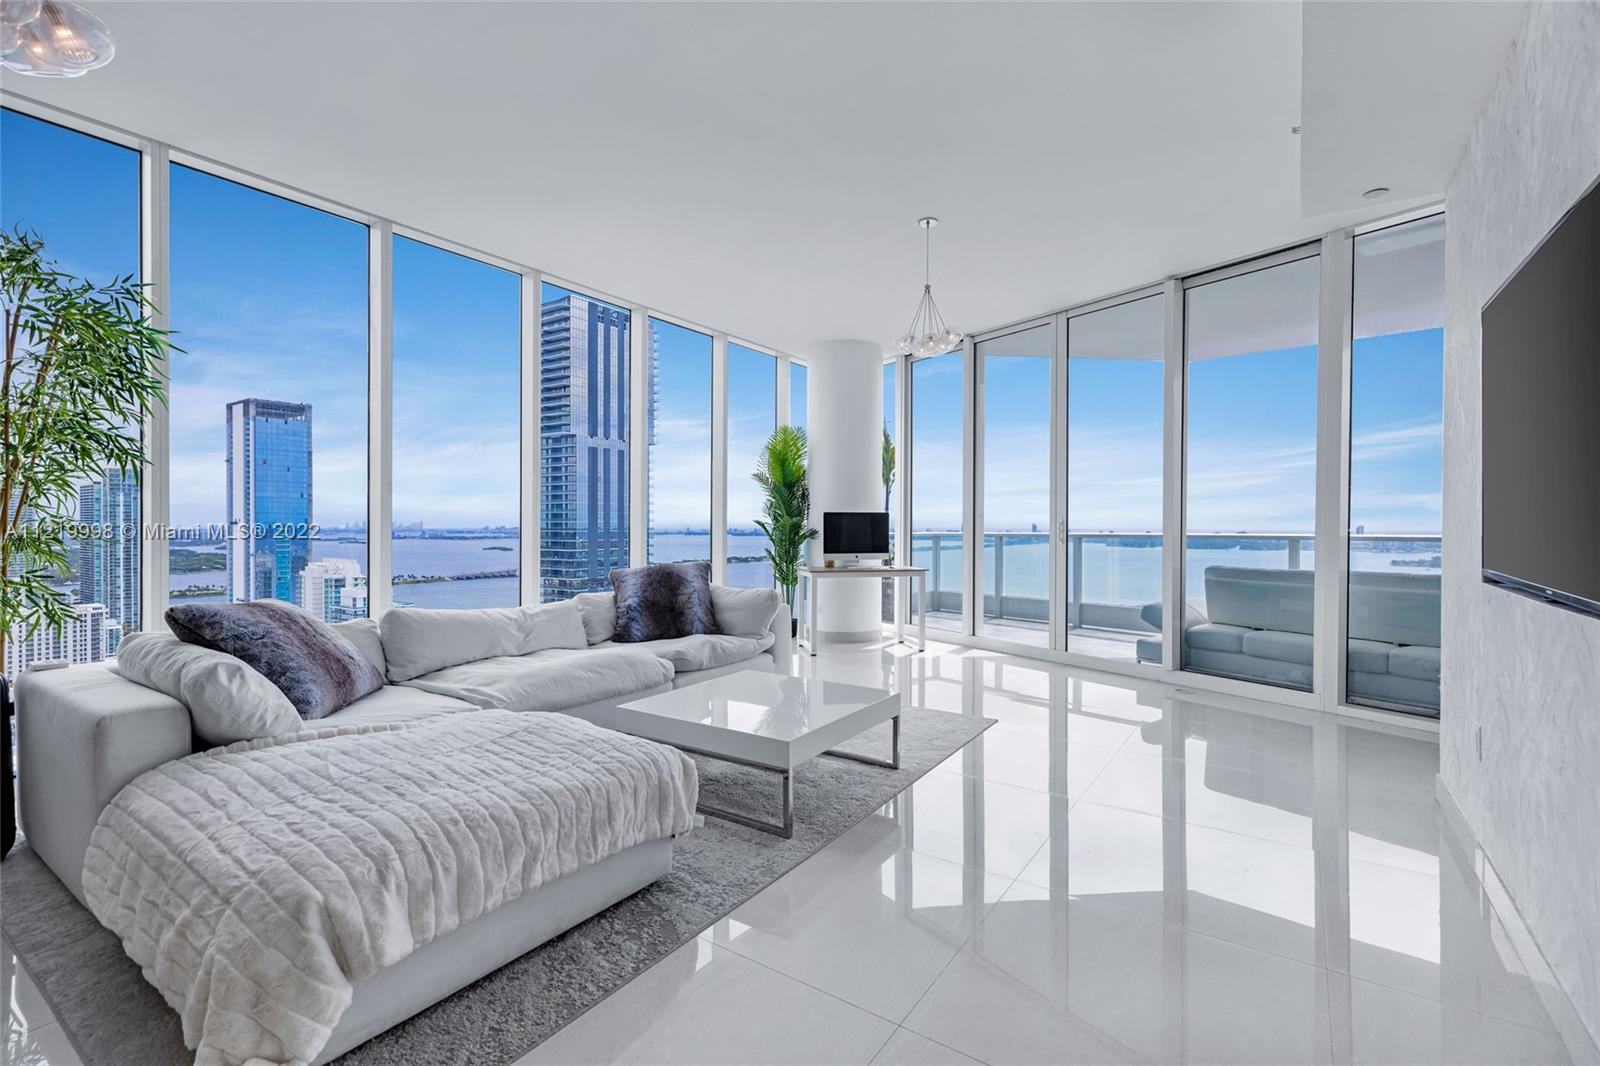 UNOBSTRUCTED ocean and Biscayne Bay views at the ultra luxury Paramount Bay. This gorgeous NE corner unit features 2 beds / 2.5 baths, private foyer with 2 elevators, split floor plan with private bathrooms, updated porcelain floors, brand new AC unit, designer light fixtures, private laundry room and more. Amenities designed by Lenny Kravitz include sunrise & sunset resort-style pools with private cabanas, yoga & Pilates studio, kids room, business center, party room, state-of-the-art gym facility & 6,000 sqft spa, valet services & 24-hour security. Centrally located in the heart of Edgewater across from Margaret Pace Park. Minutes away from Downtown, Brickell, Midtown, Wynwood, Miami Beach & MIA international airport. Virtual 3D tour is available. A must see!